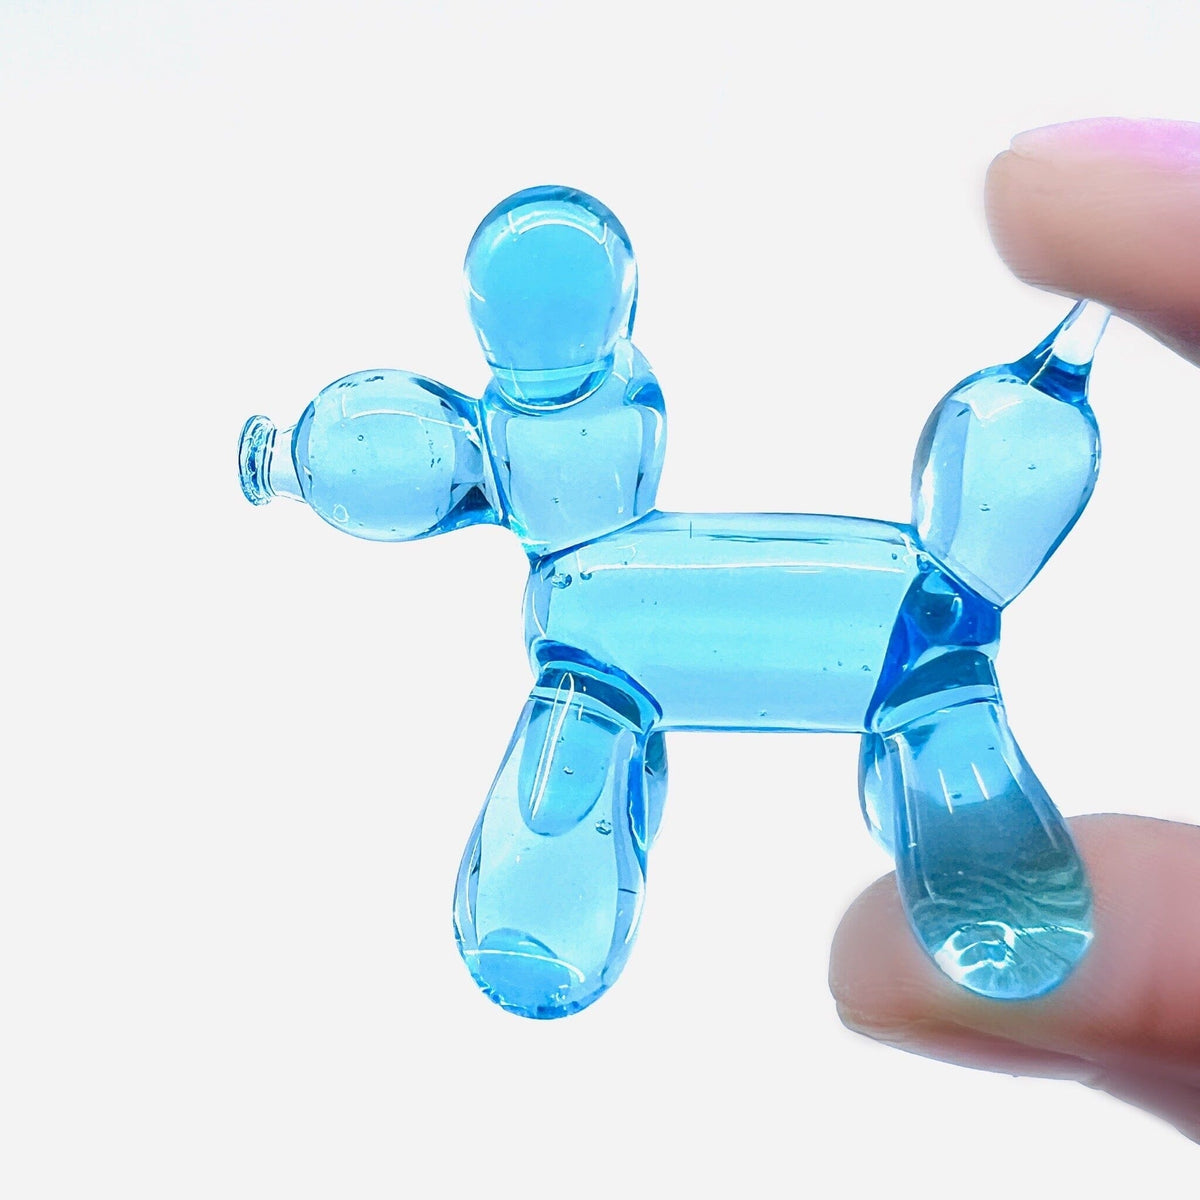 Wholesale 6 Pack Balloon Dog Figurines